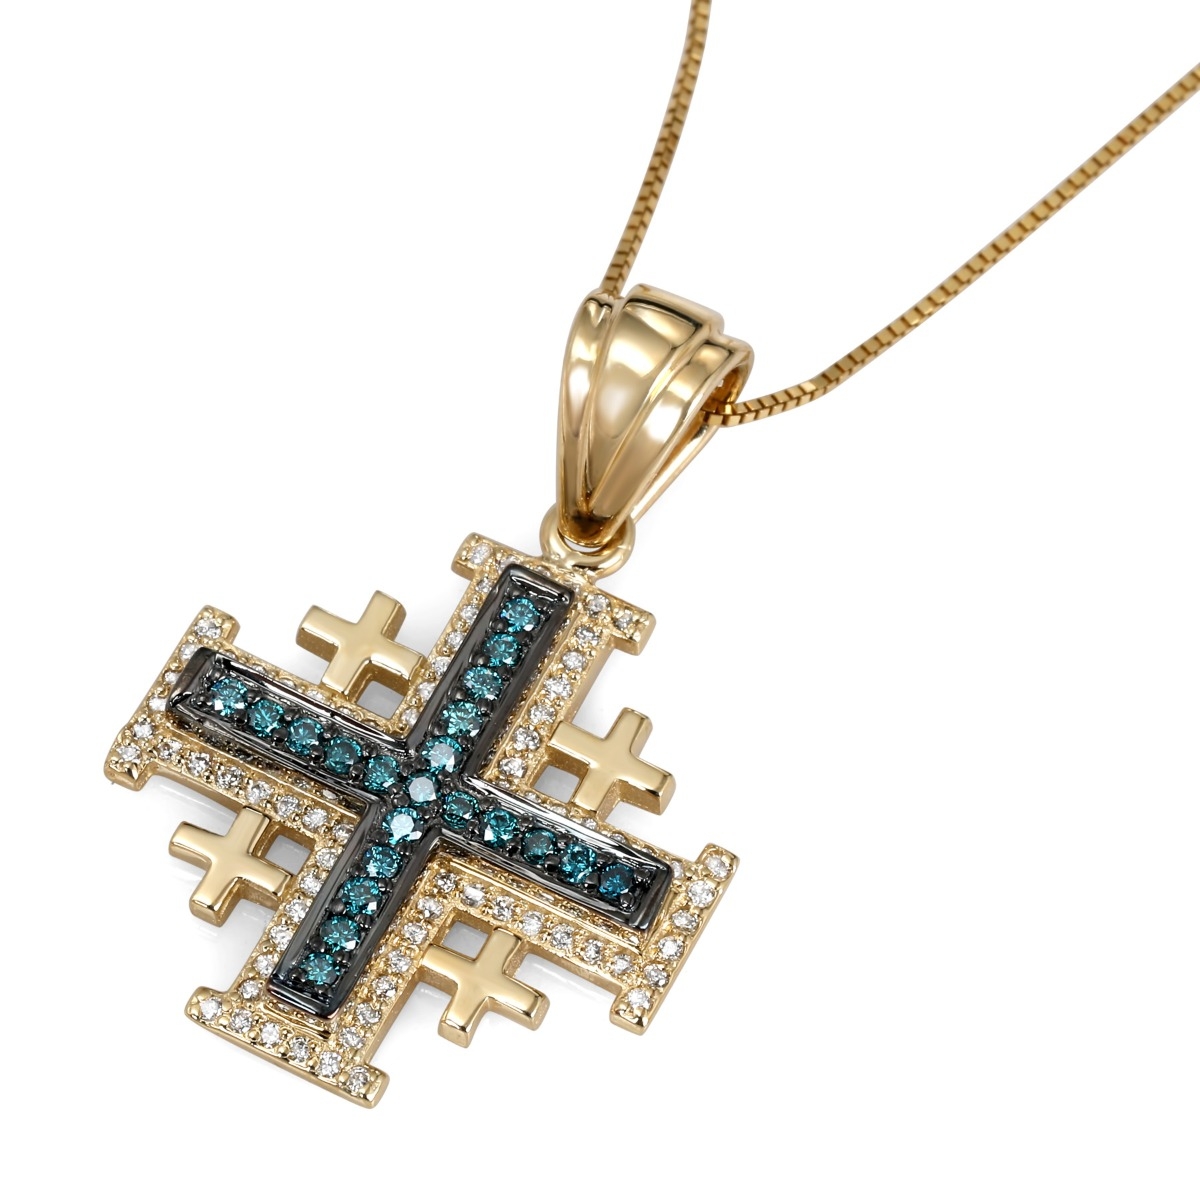 Anbinder Deluxe 14K Yellow & Black Gold Jerusalem Cross Pendant with Diamond Border and Blue Diamond Accents - 1